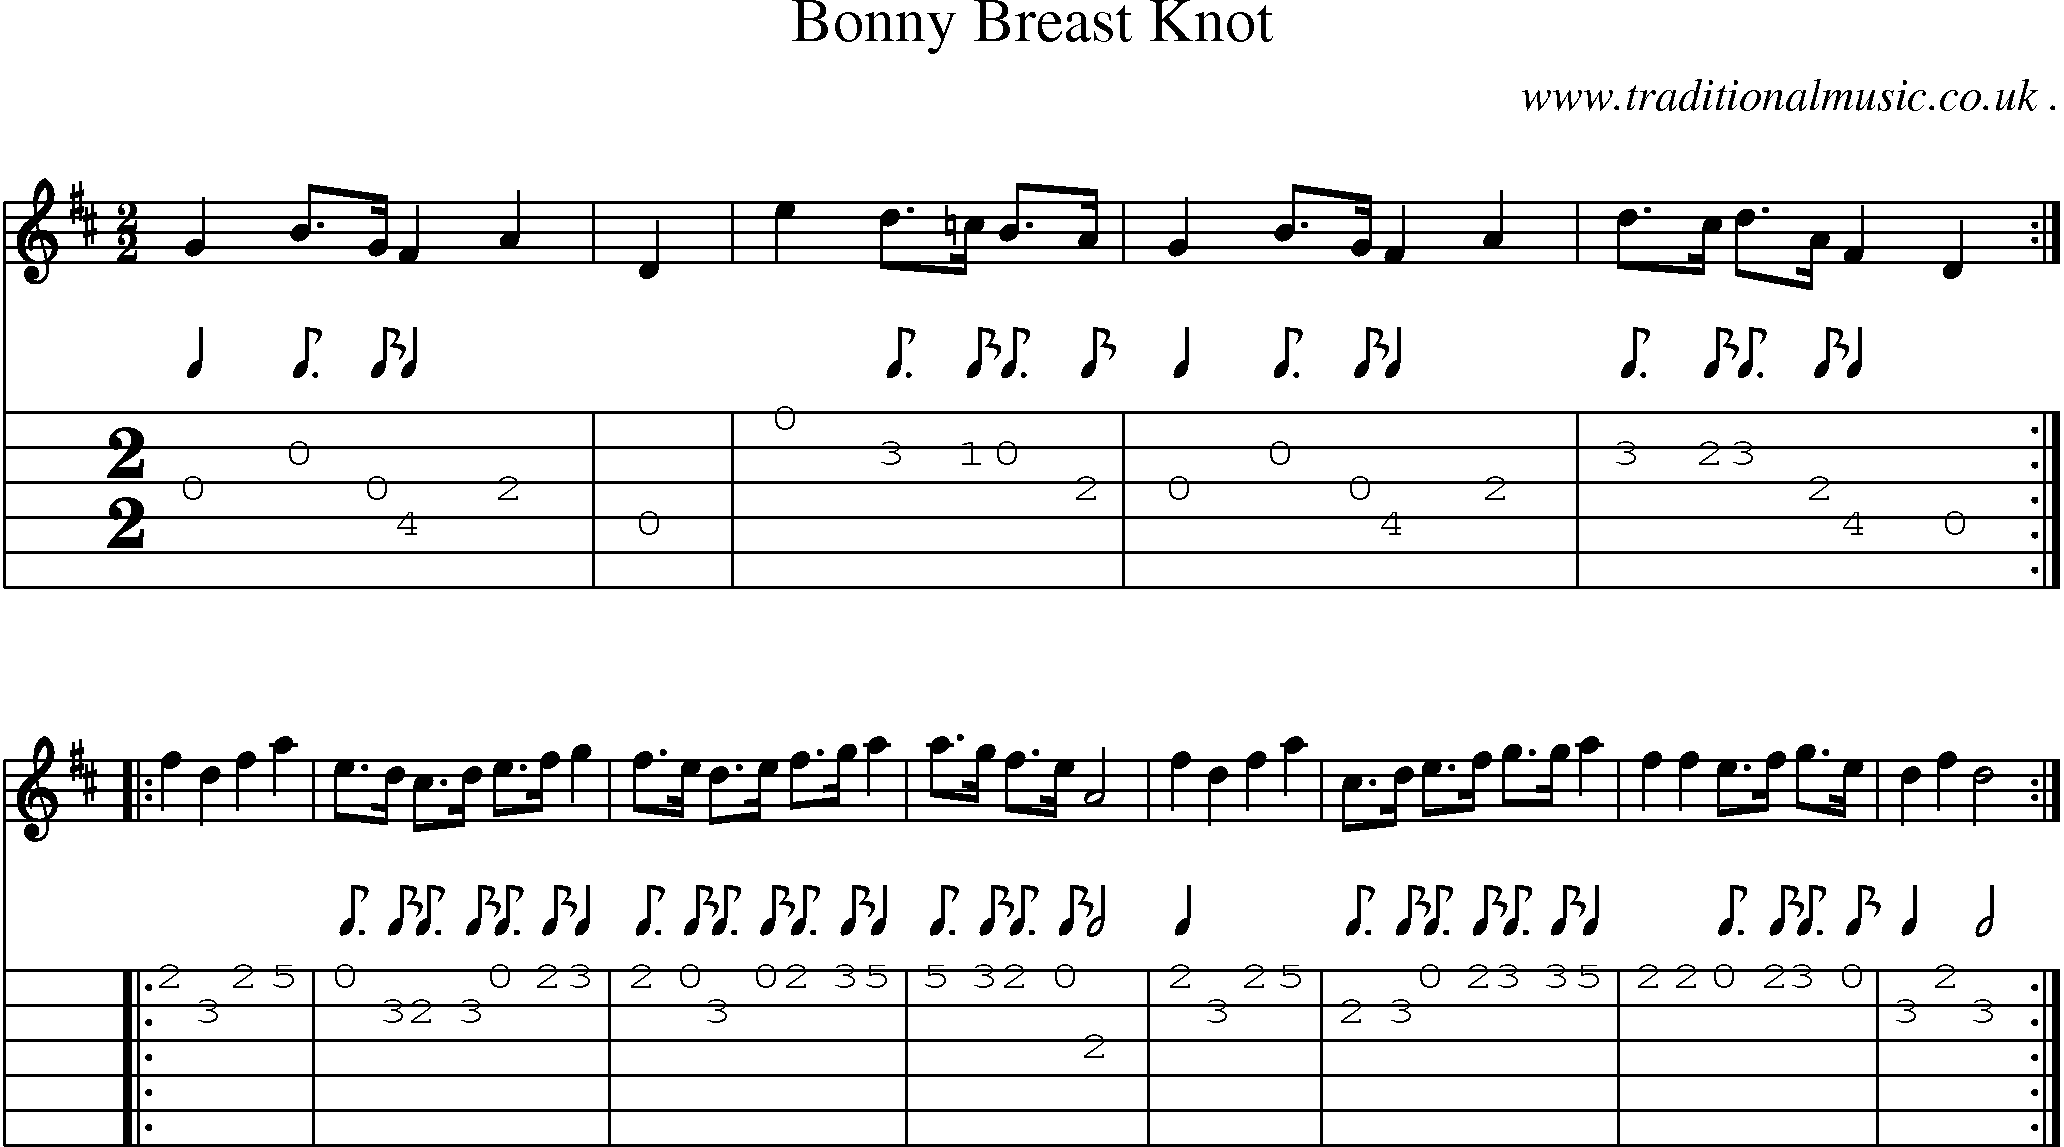 Sheet-Music and Guitar Tabs for Bonny Breast Knot